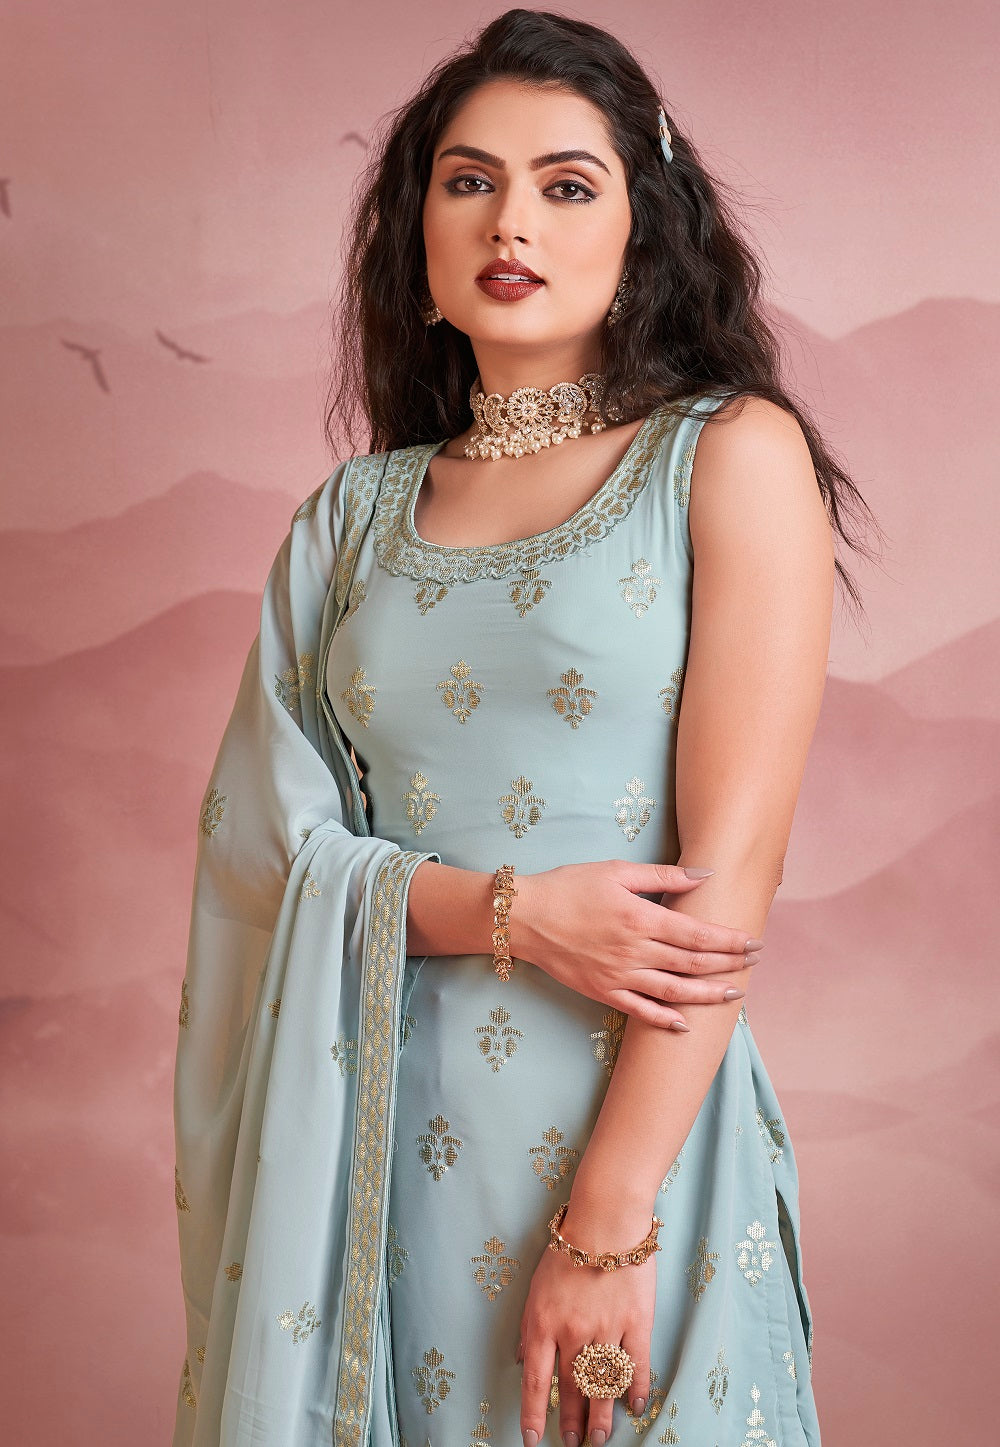 Georgette Embroidered Pakistani Suit in Sky Blue